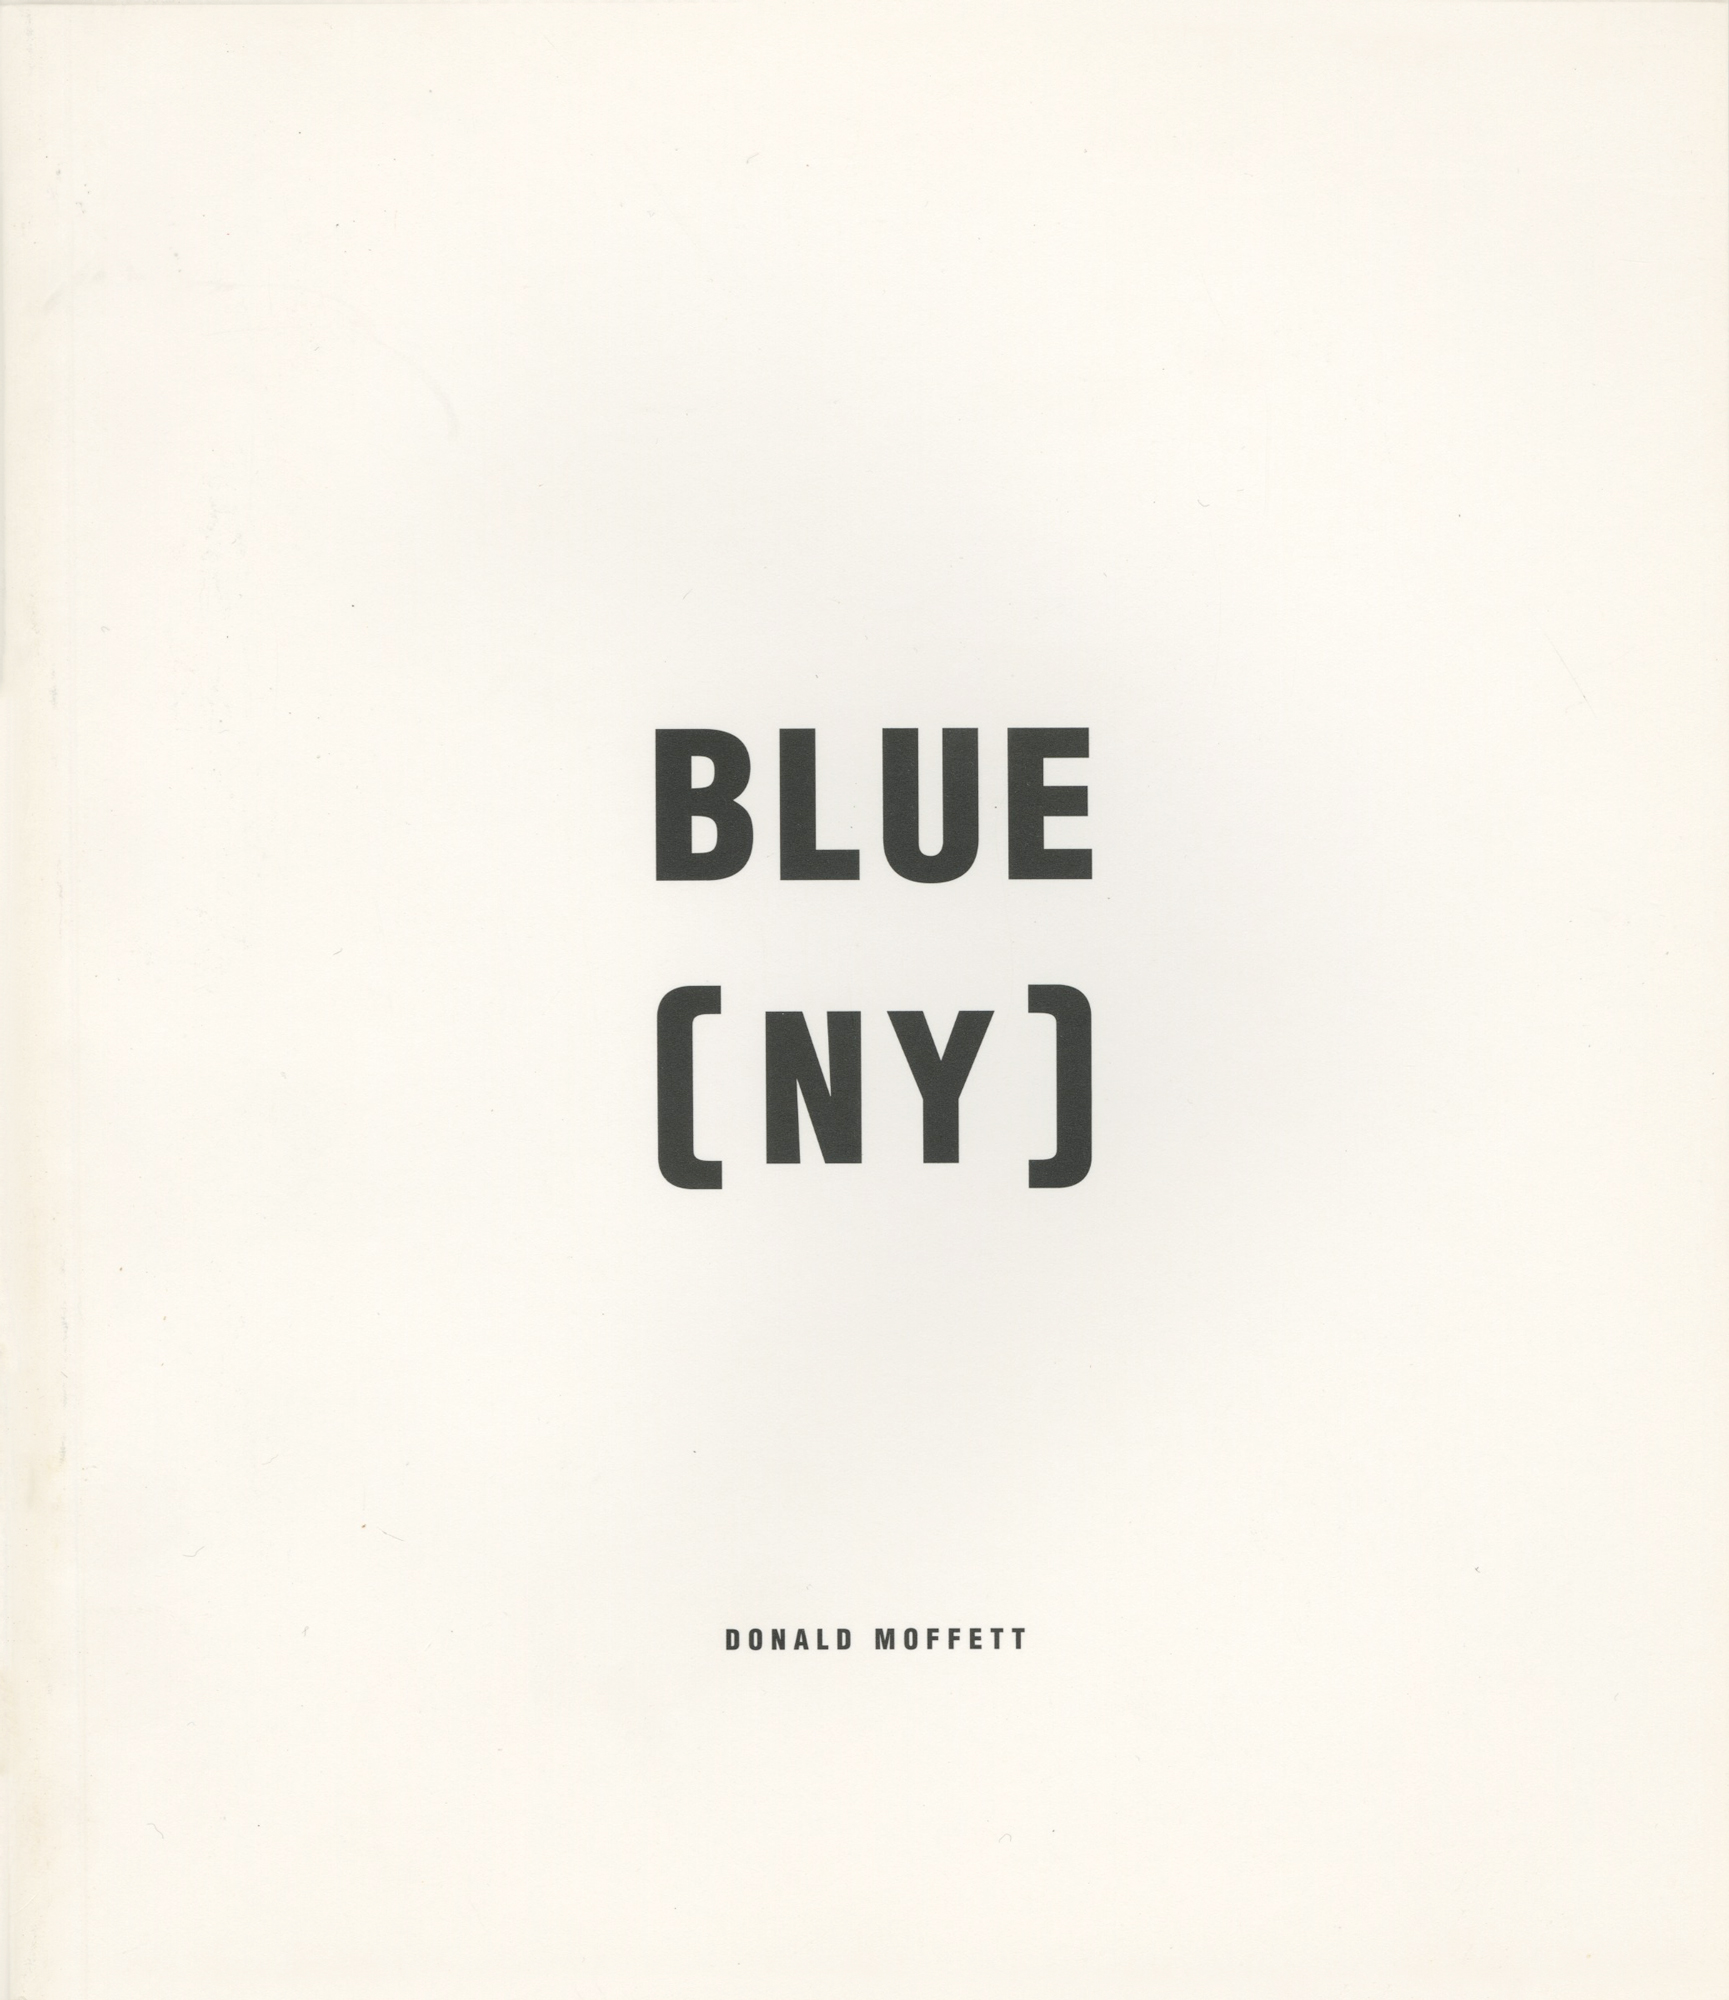 Cover for publication "Blue [NY}".